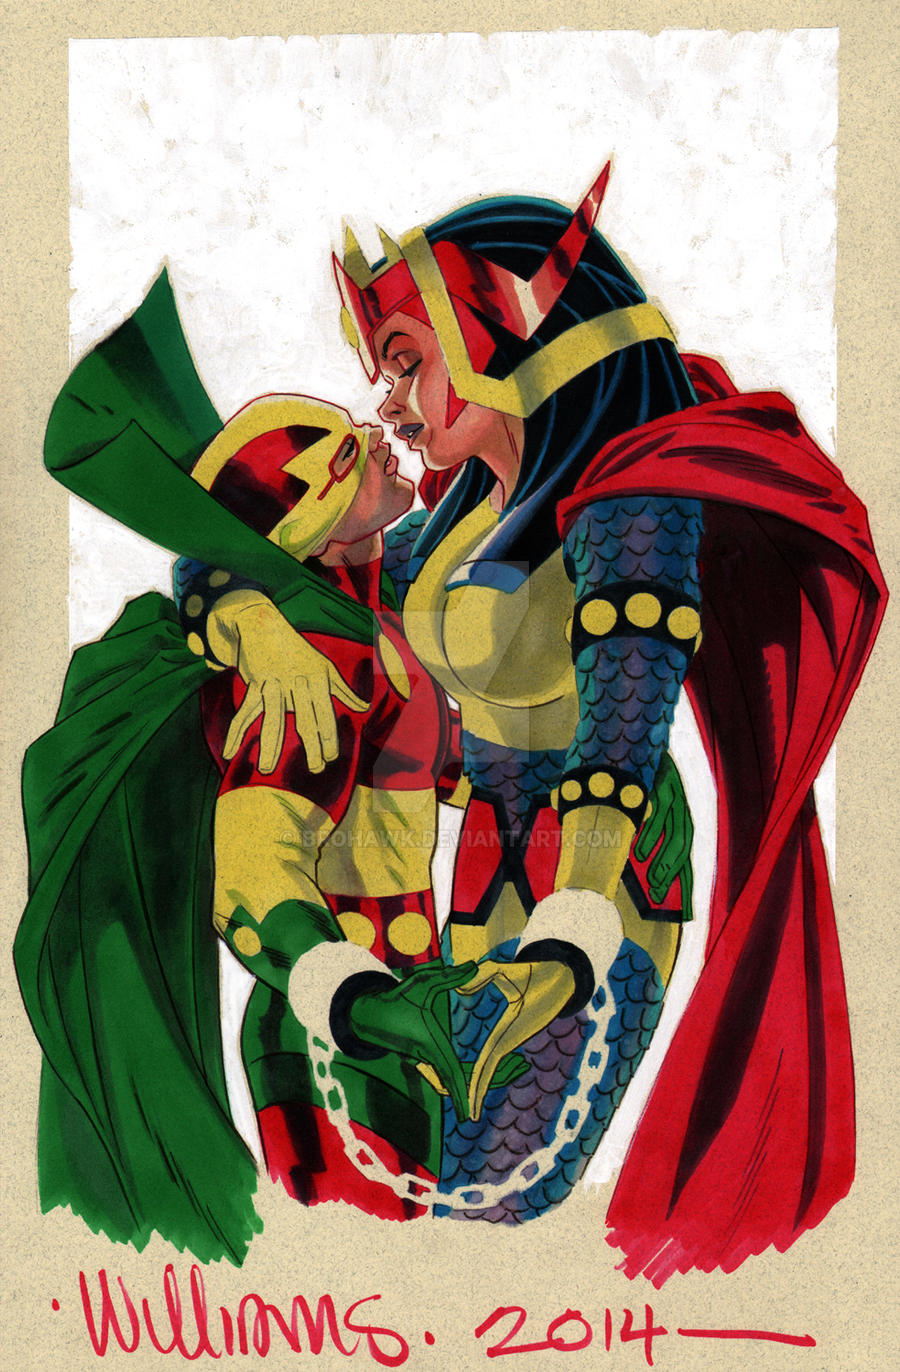 Scott and Barda going to Heroes 2014